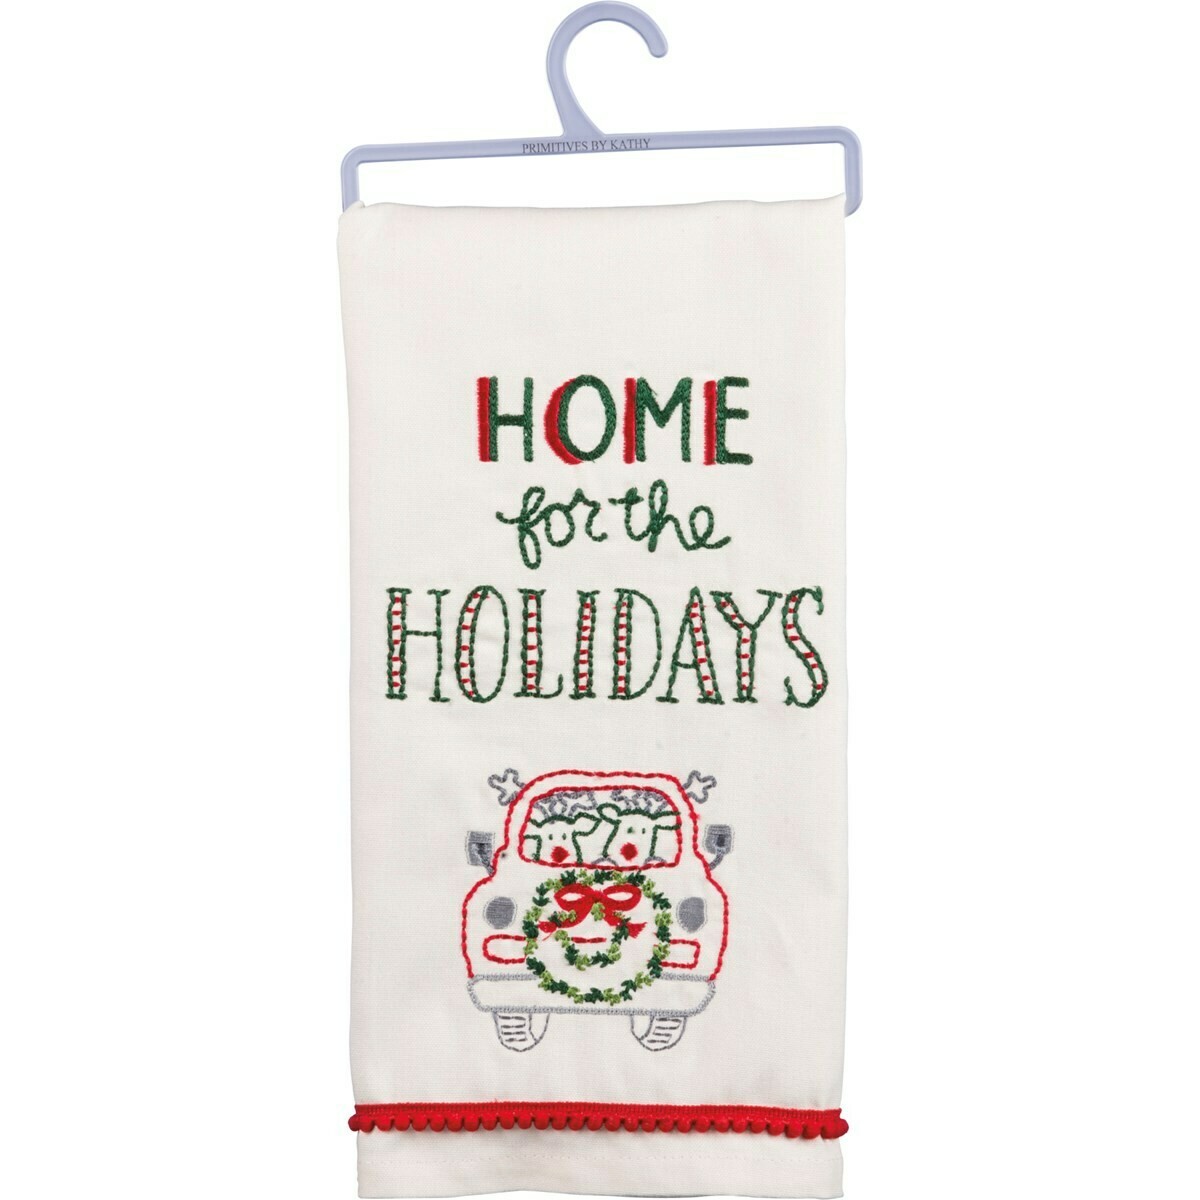 Home for the Holidays Towel